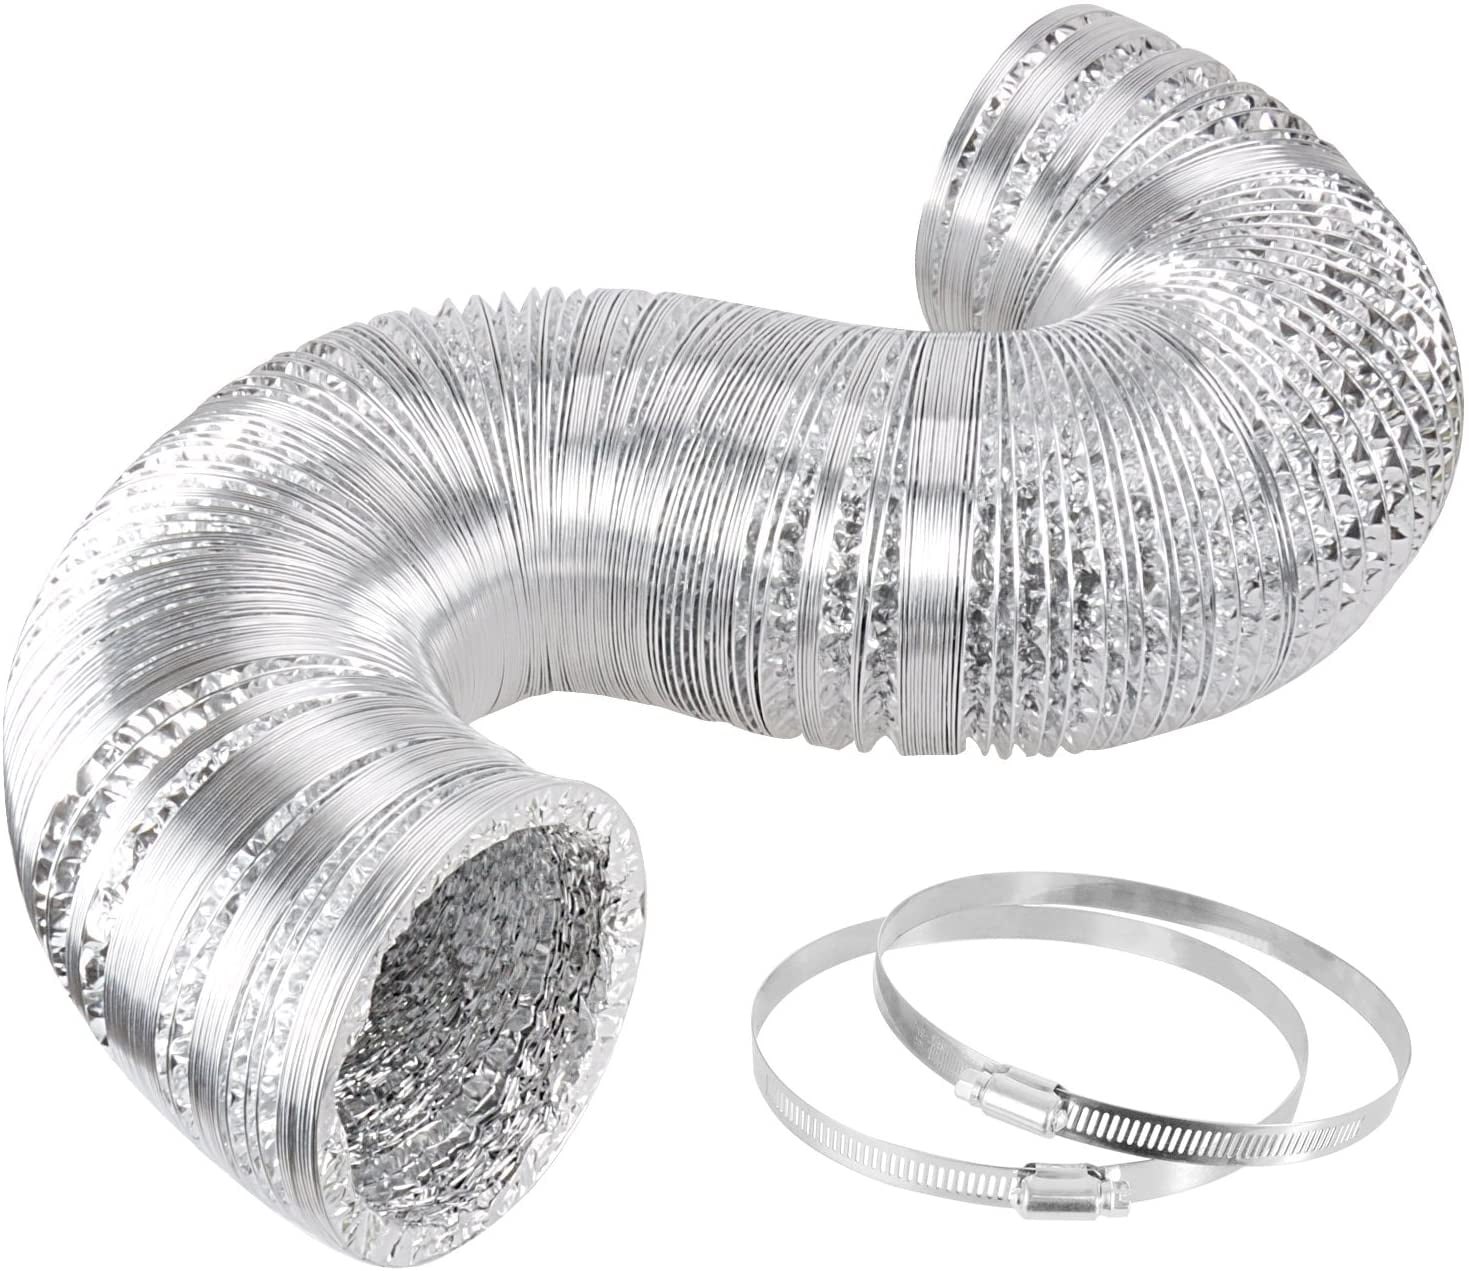 Clothes Dryer Duct Air Duct 3 Inch Duct Hose by 16.5 Feet Gray Flexible 4-Layers Aluminum Dryer Vent Tube Transition Duct Air Hose with 2 Screw Clamps Great for HVAC Duct